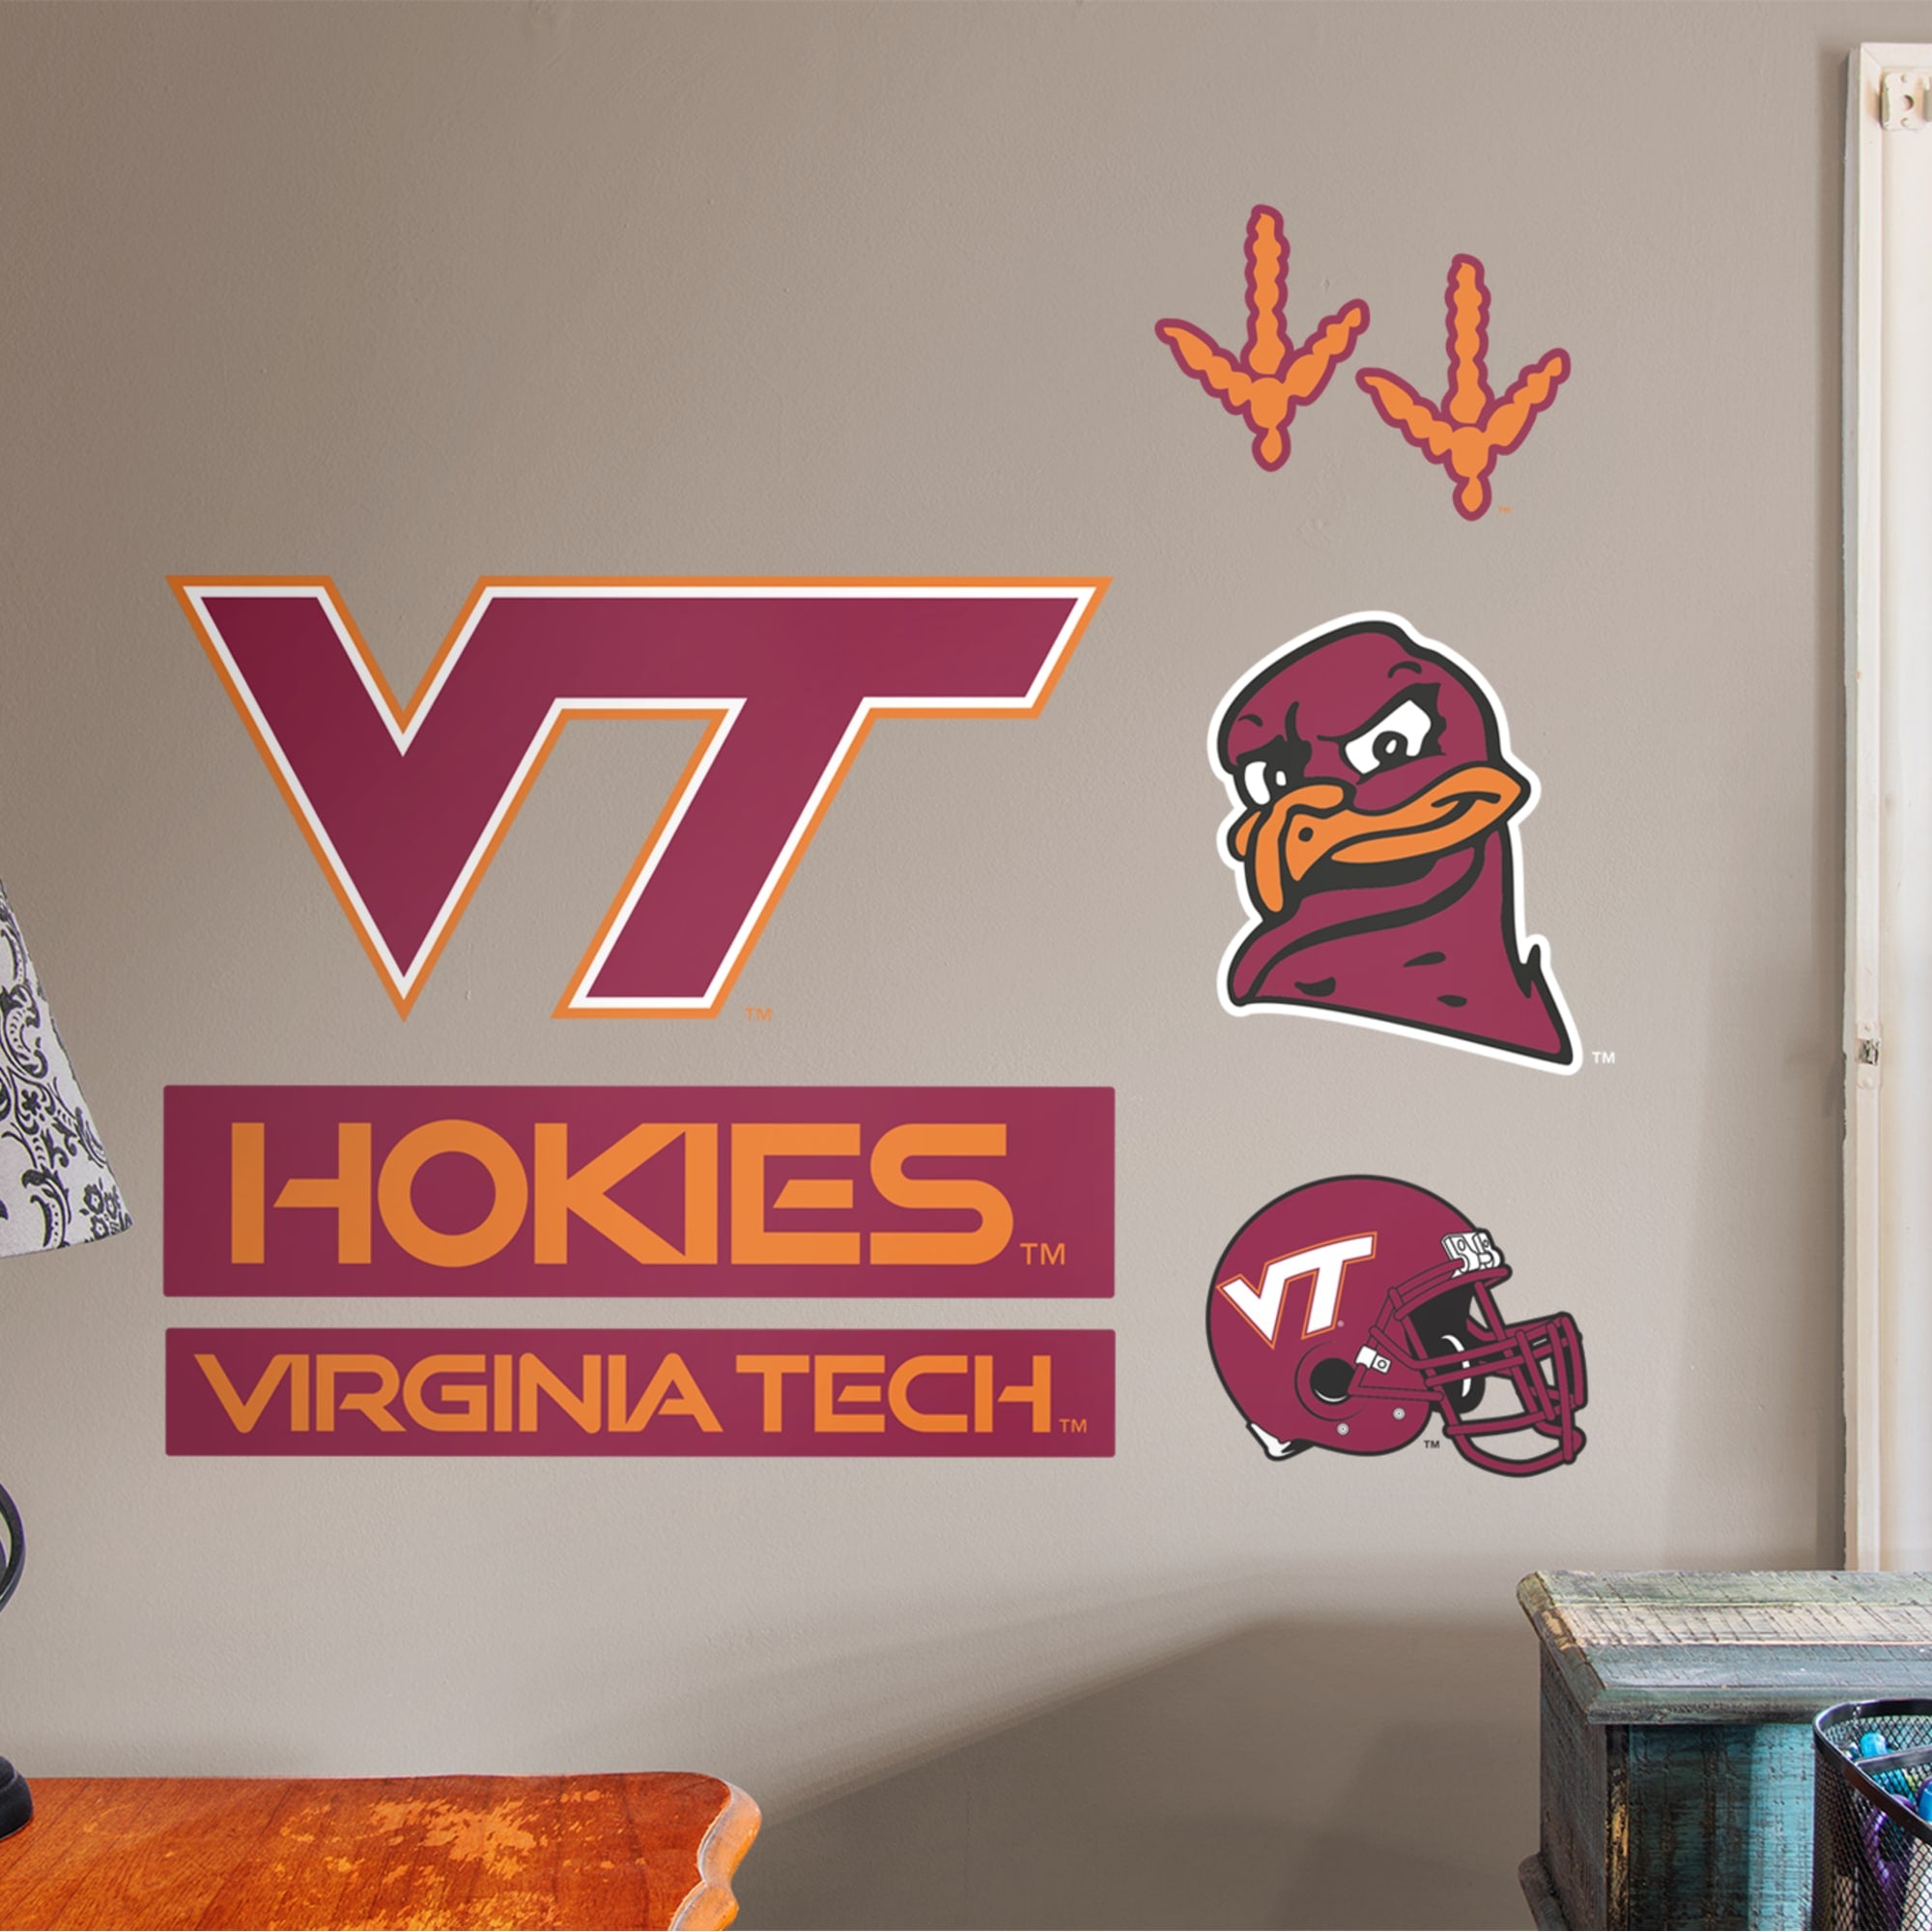 Virginia Tech Hokies: Logo Assortment - Officially Licensed Removable Wall Decals 26.0"W x 39.5"H by Fathead | Vinyl